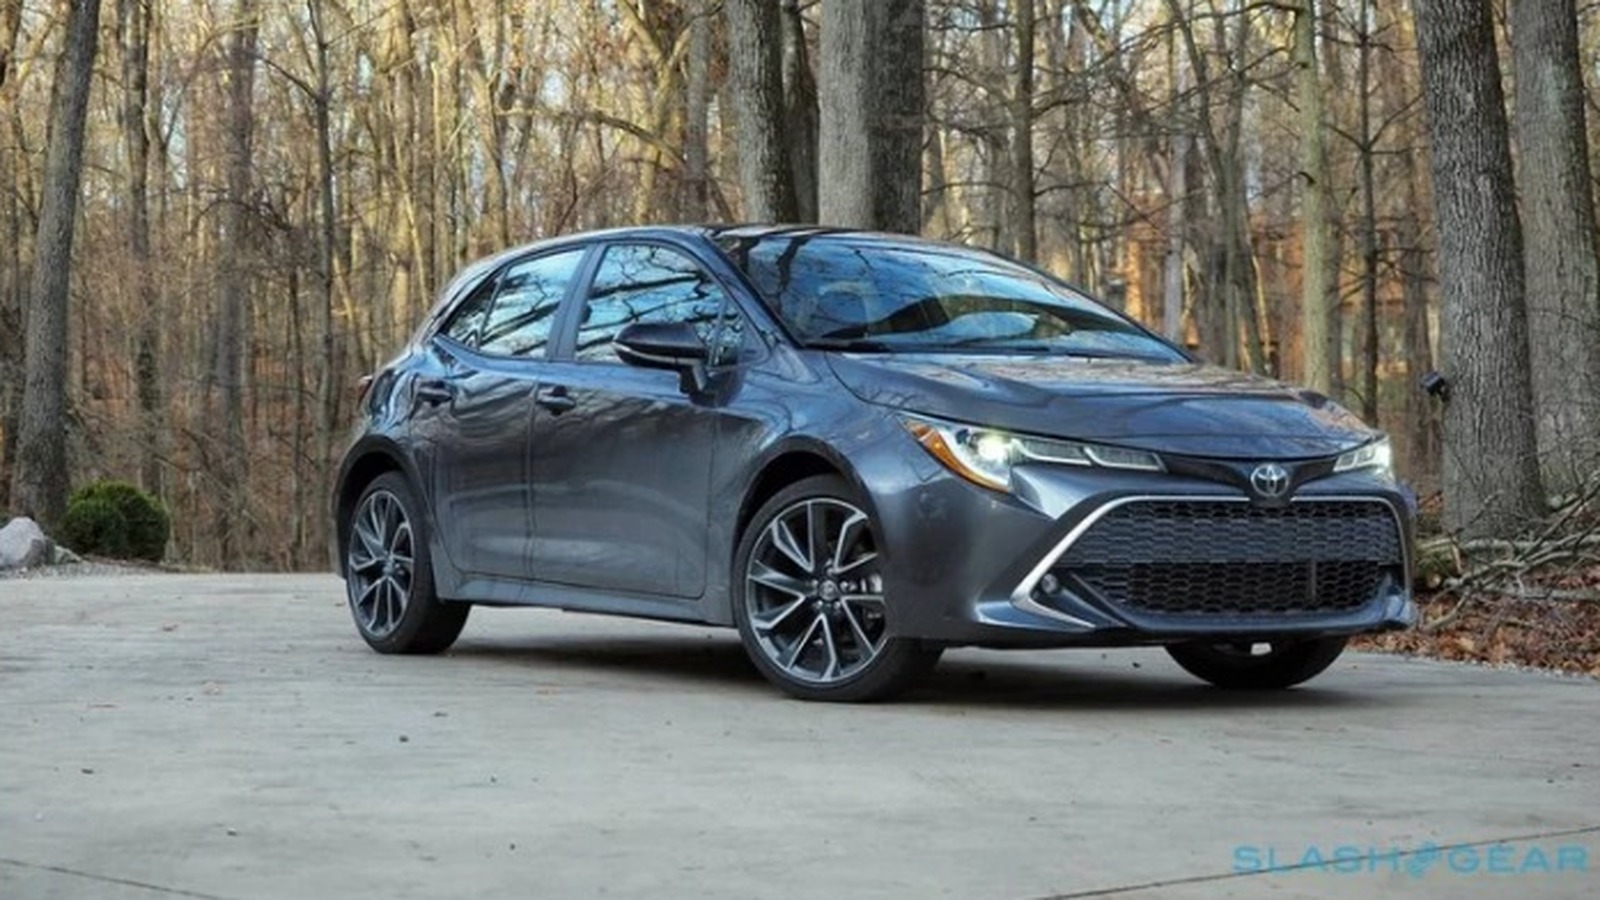 2021 Toyota Corolla Hatchback Review - Cheap Thrills